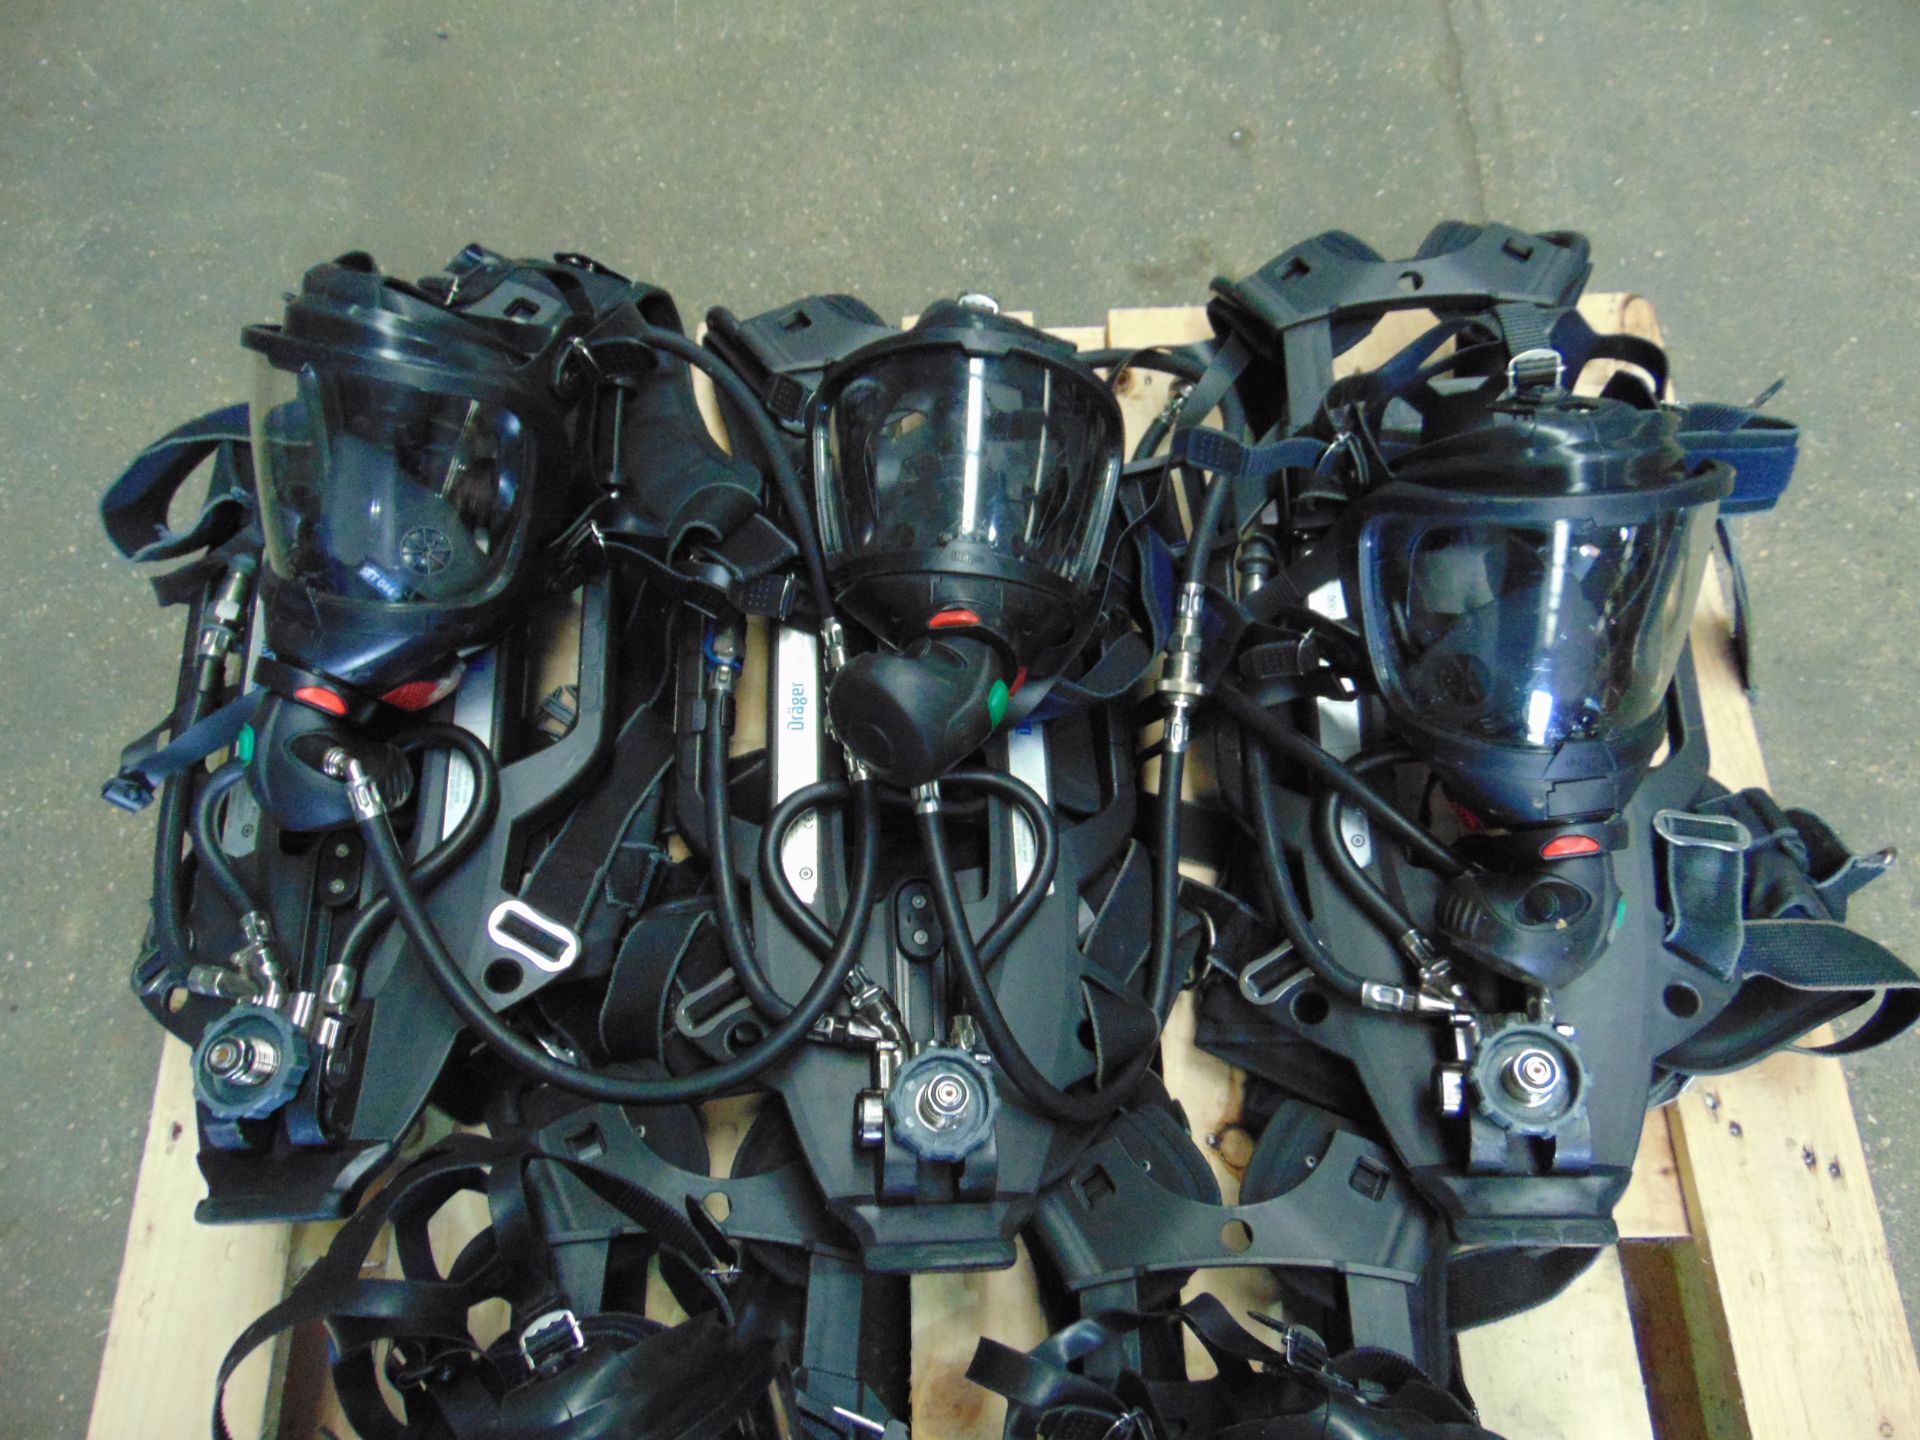 5 x Drager PSS 7000 Self Contained Breathing Apparatus w/ 10 x Drager 300 Bar Air Cylinders - Bild 10 aus 21